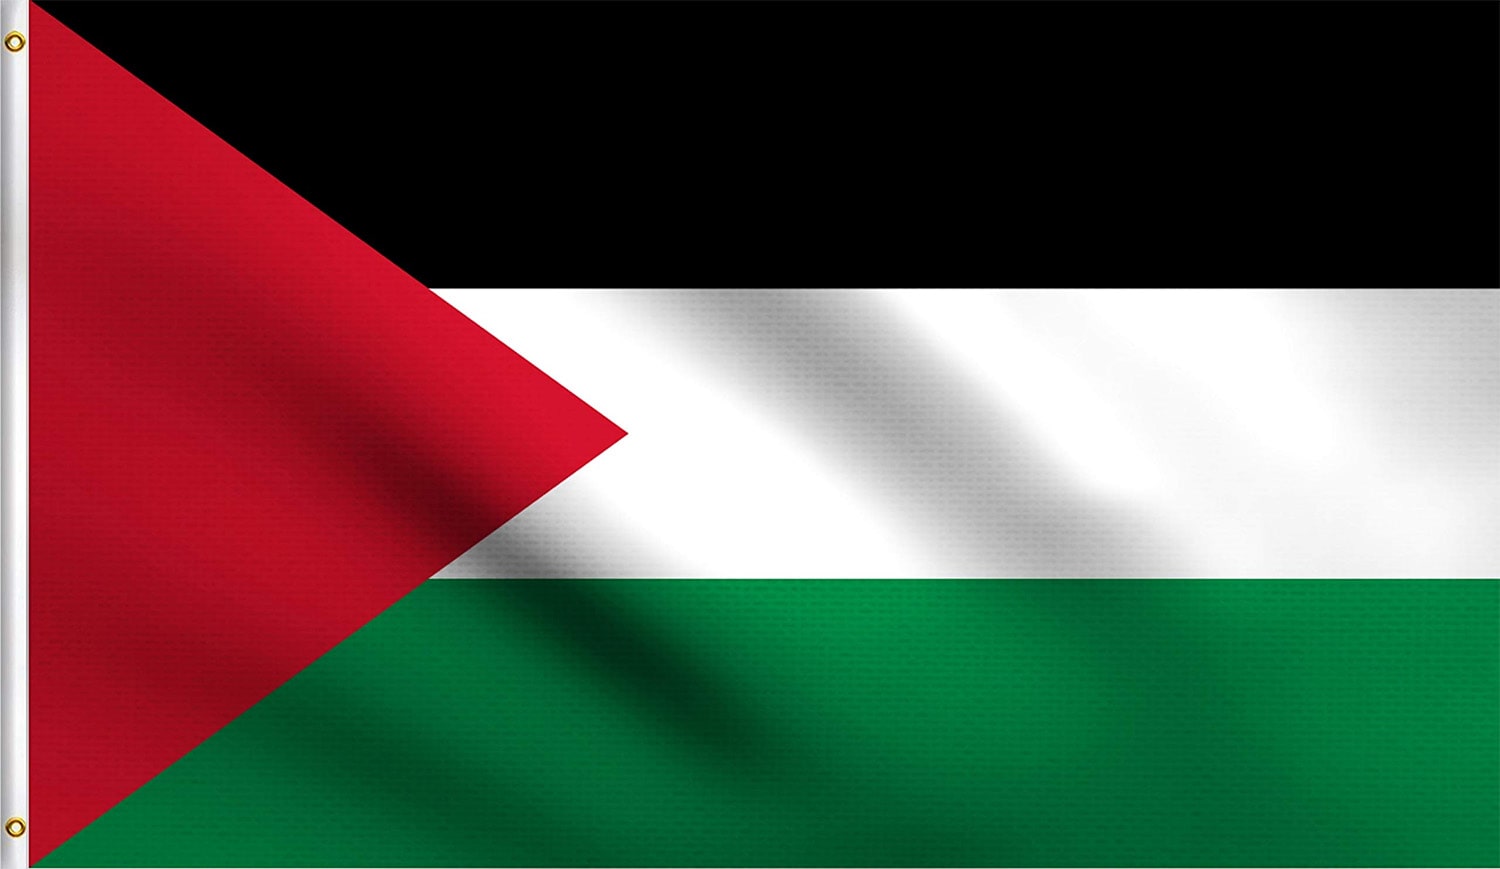 22 interesting facts about Palestine